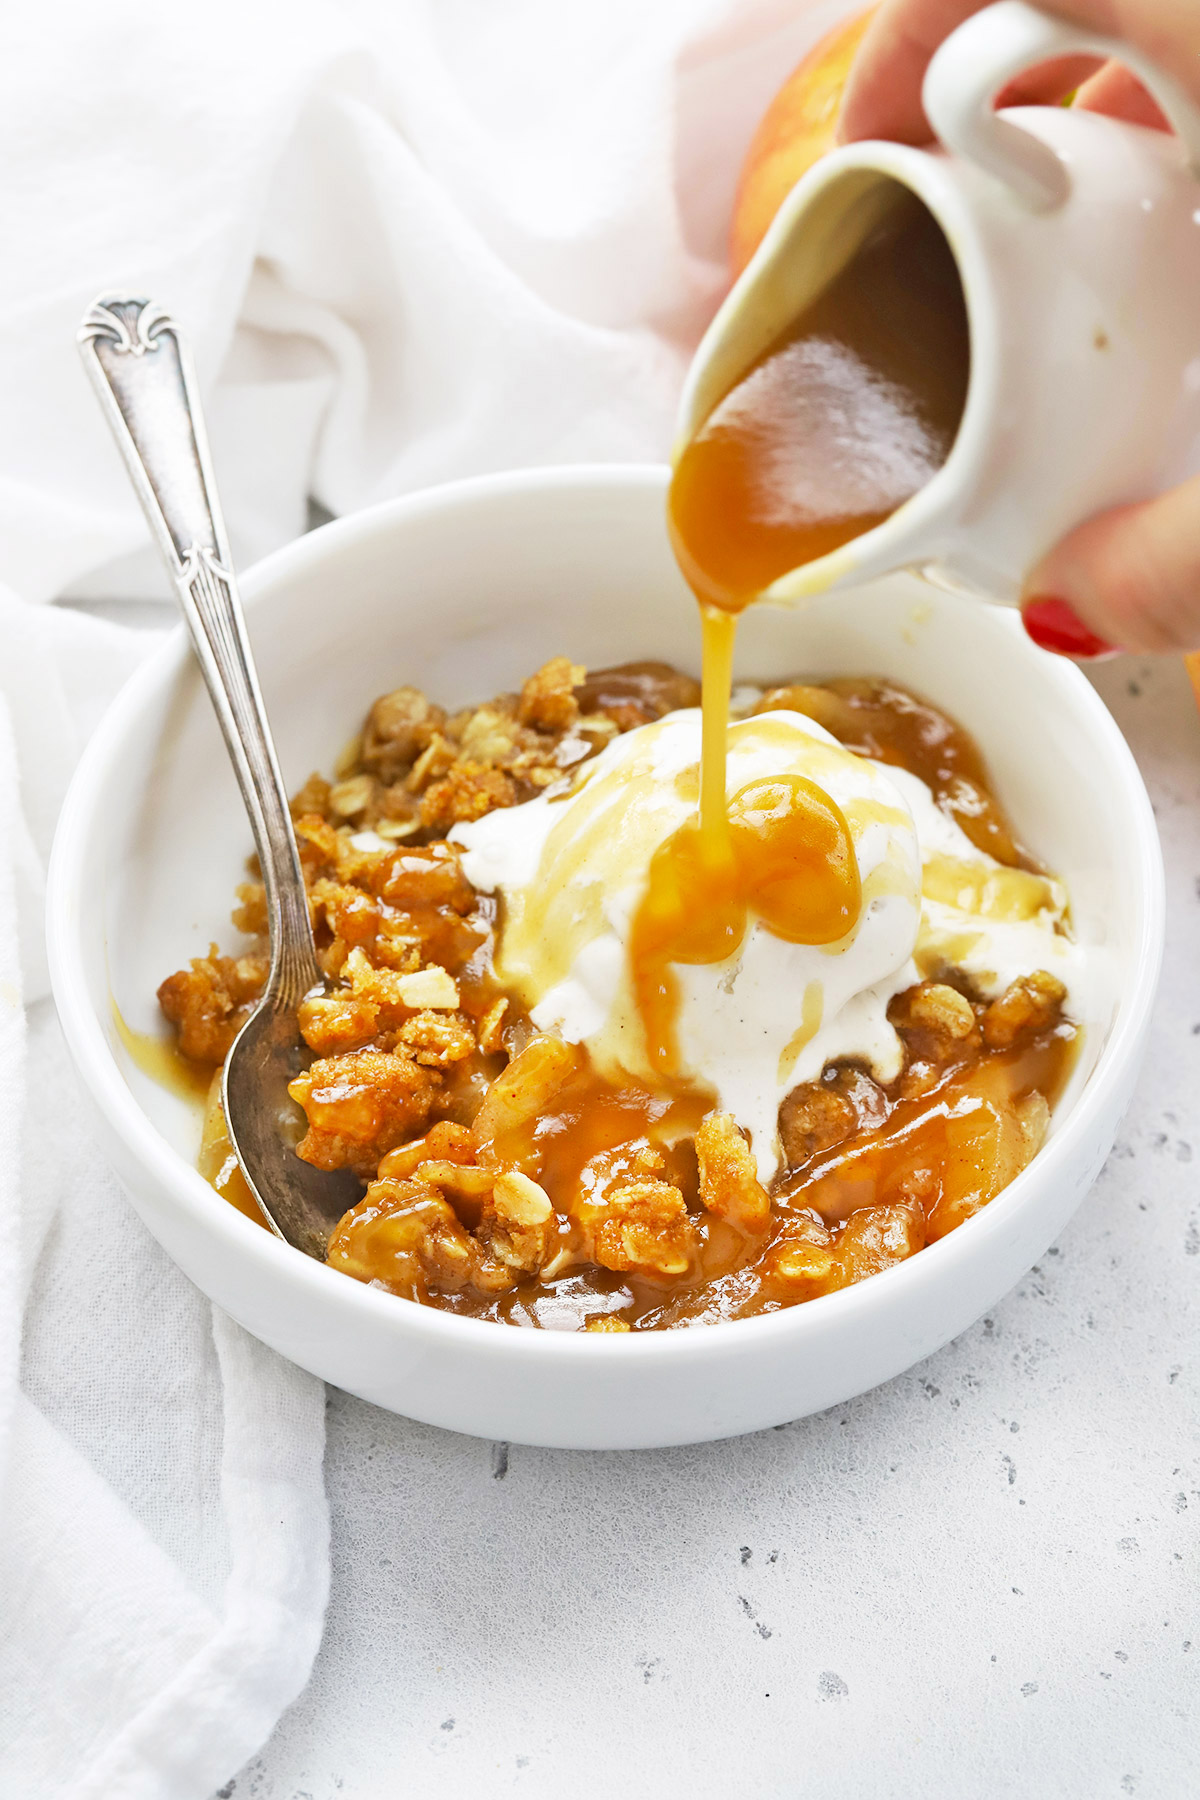 Pouring cider caramel sauce over a bowl of gluten-free apple crisp with a scoop of vanilla ice cream